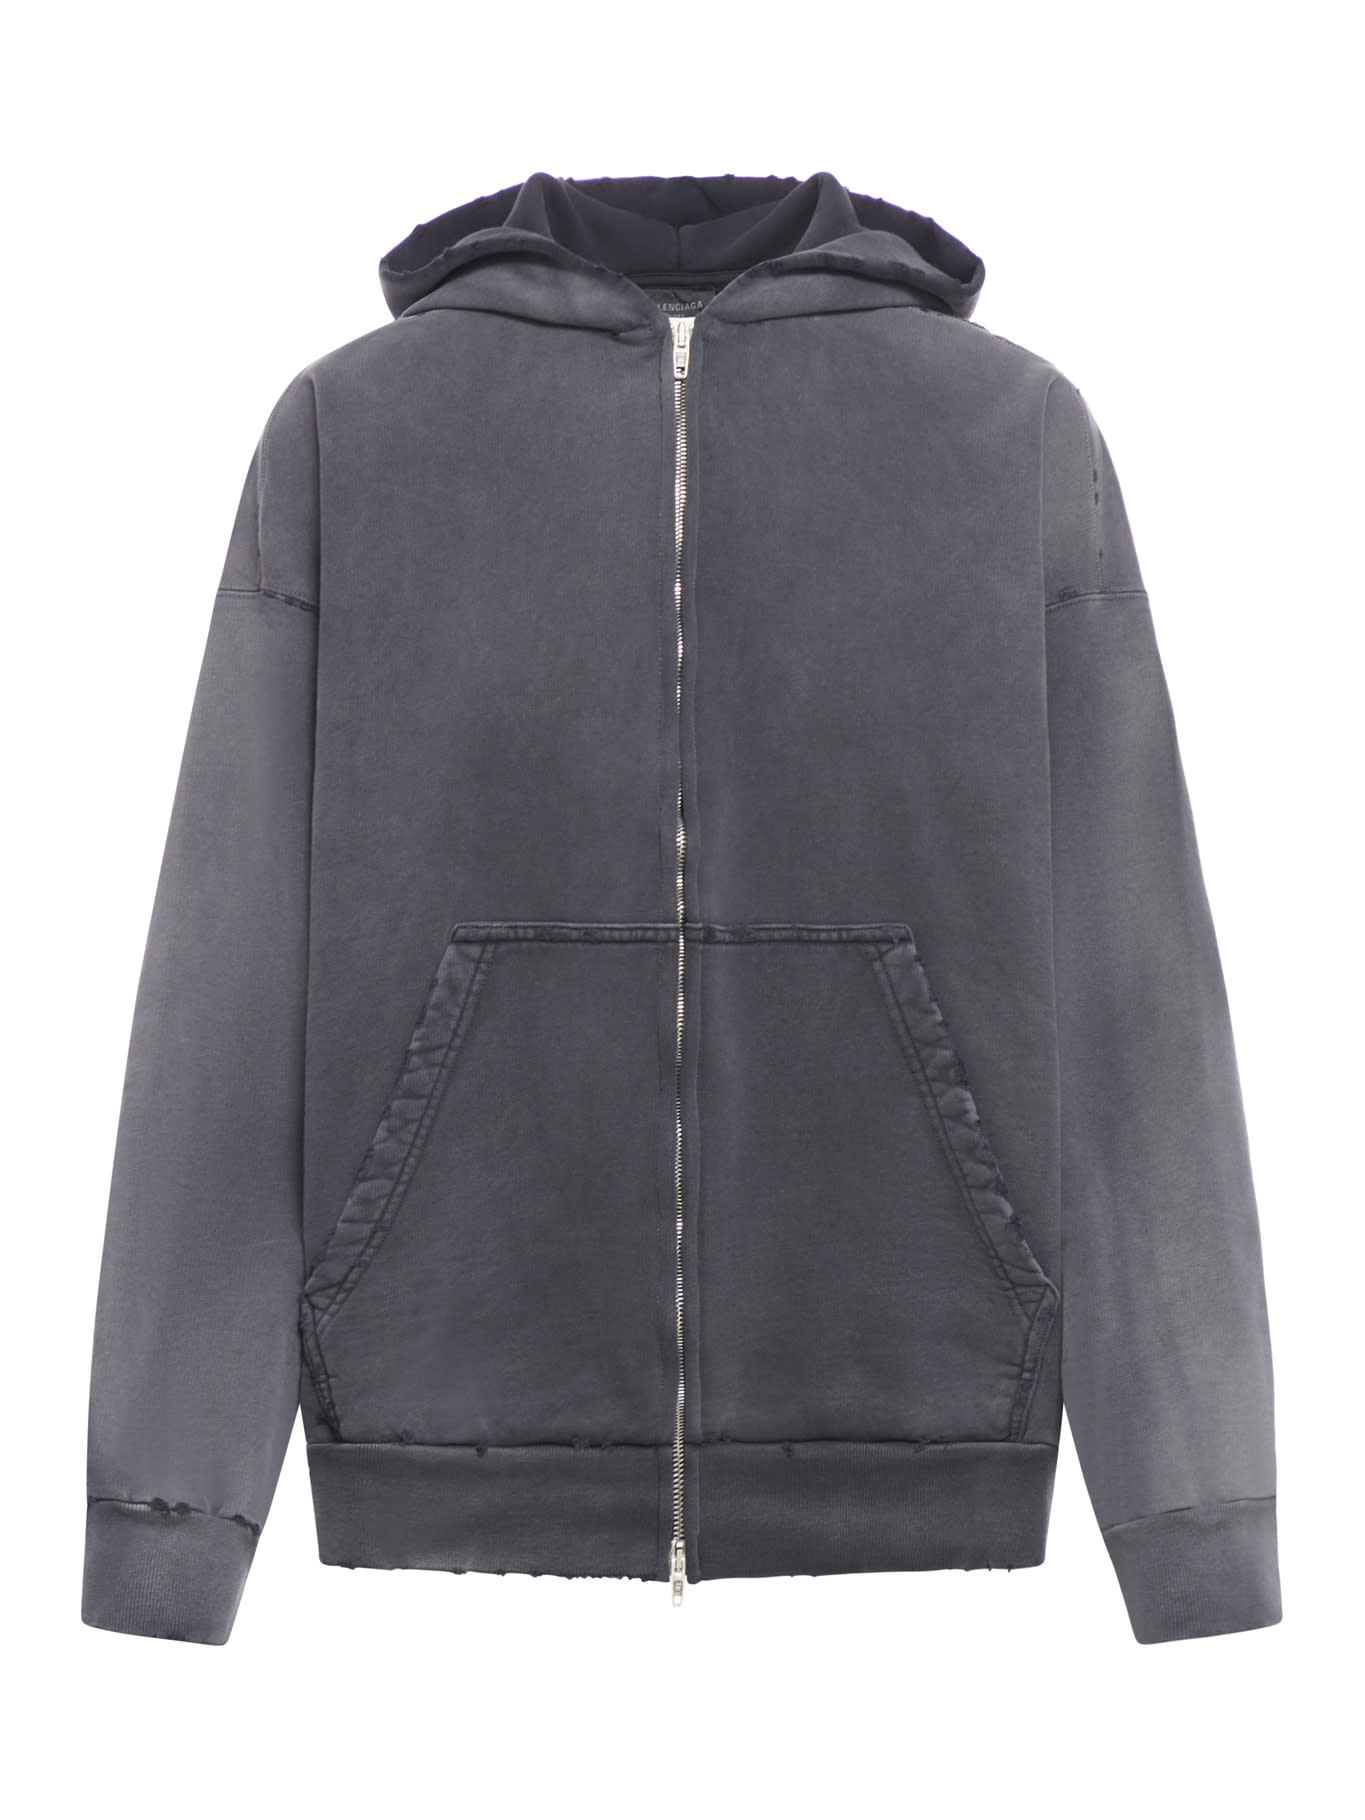 Shop Balenciaga Zip-up Hoodie Not Been Done Archetype Moll In Washed Out Black